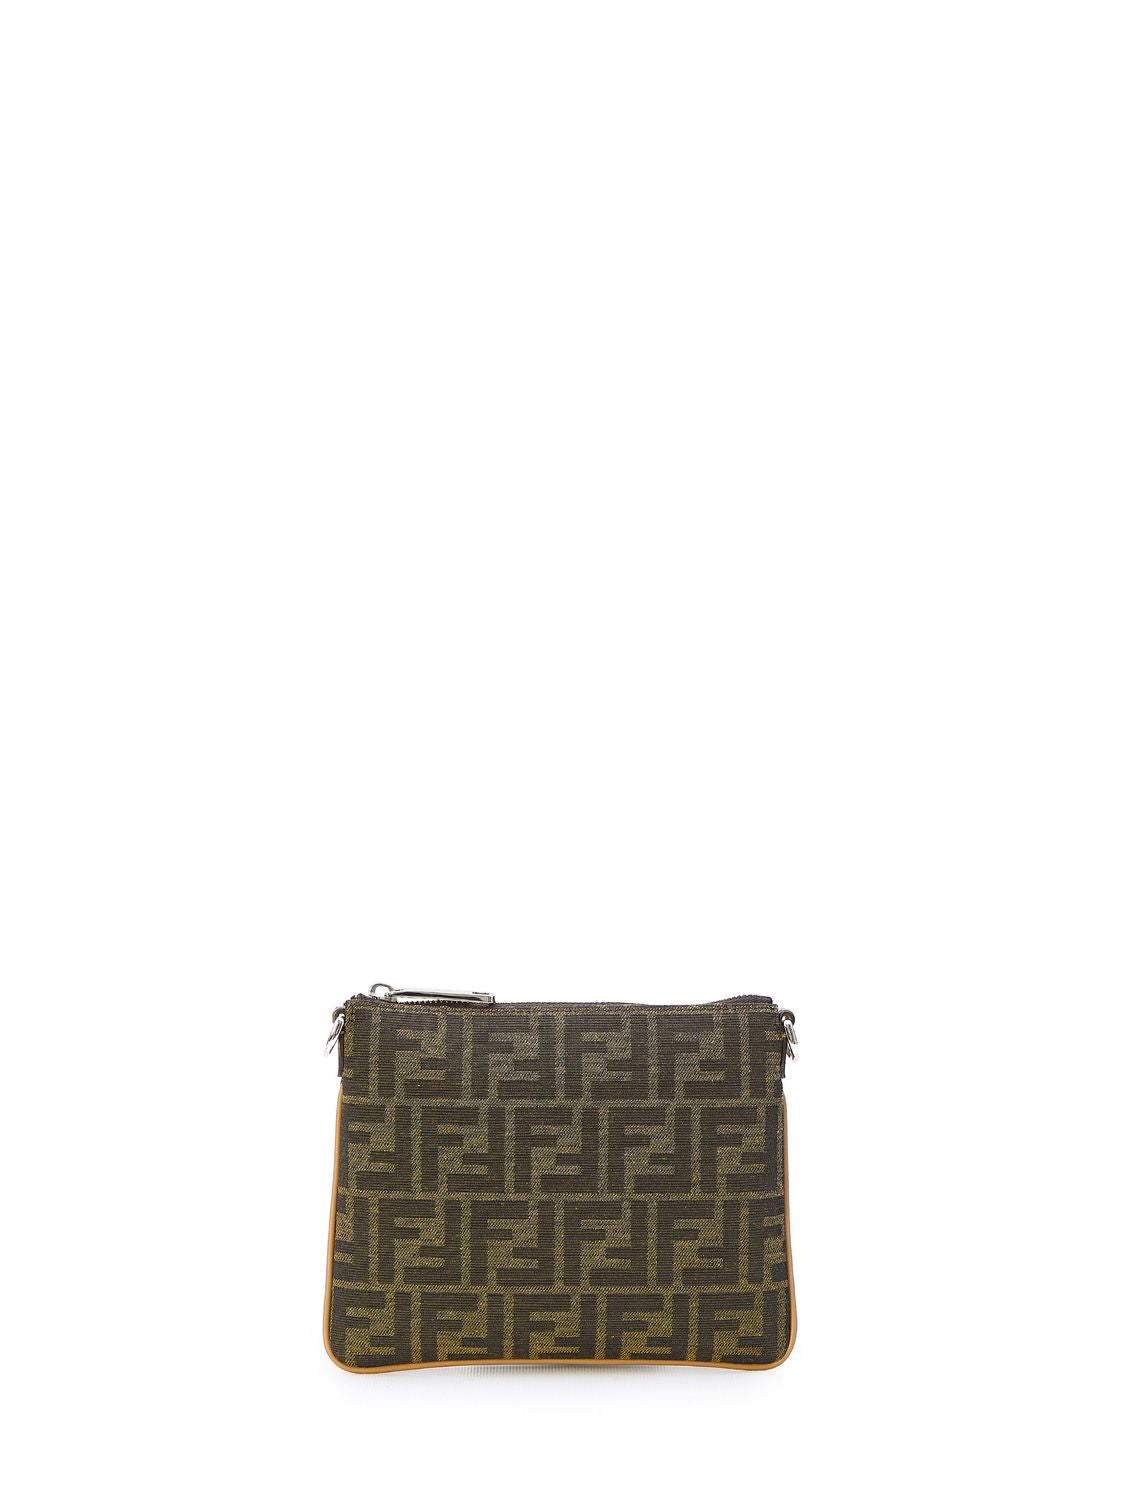 FENDI Mini Jacquard Crossbody Clutch in Tan with Beige Leather Accents, Adjustable Strap, and Zip Closure - 20.5x1 cm